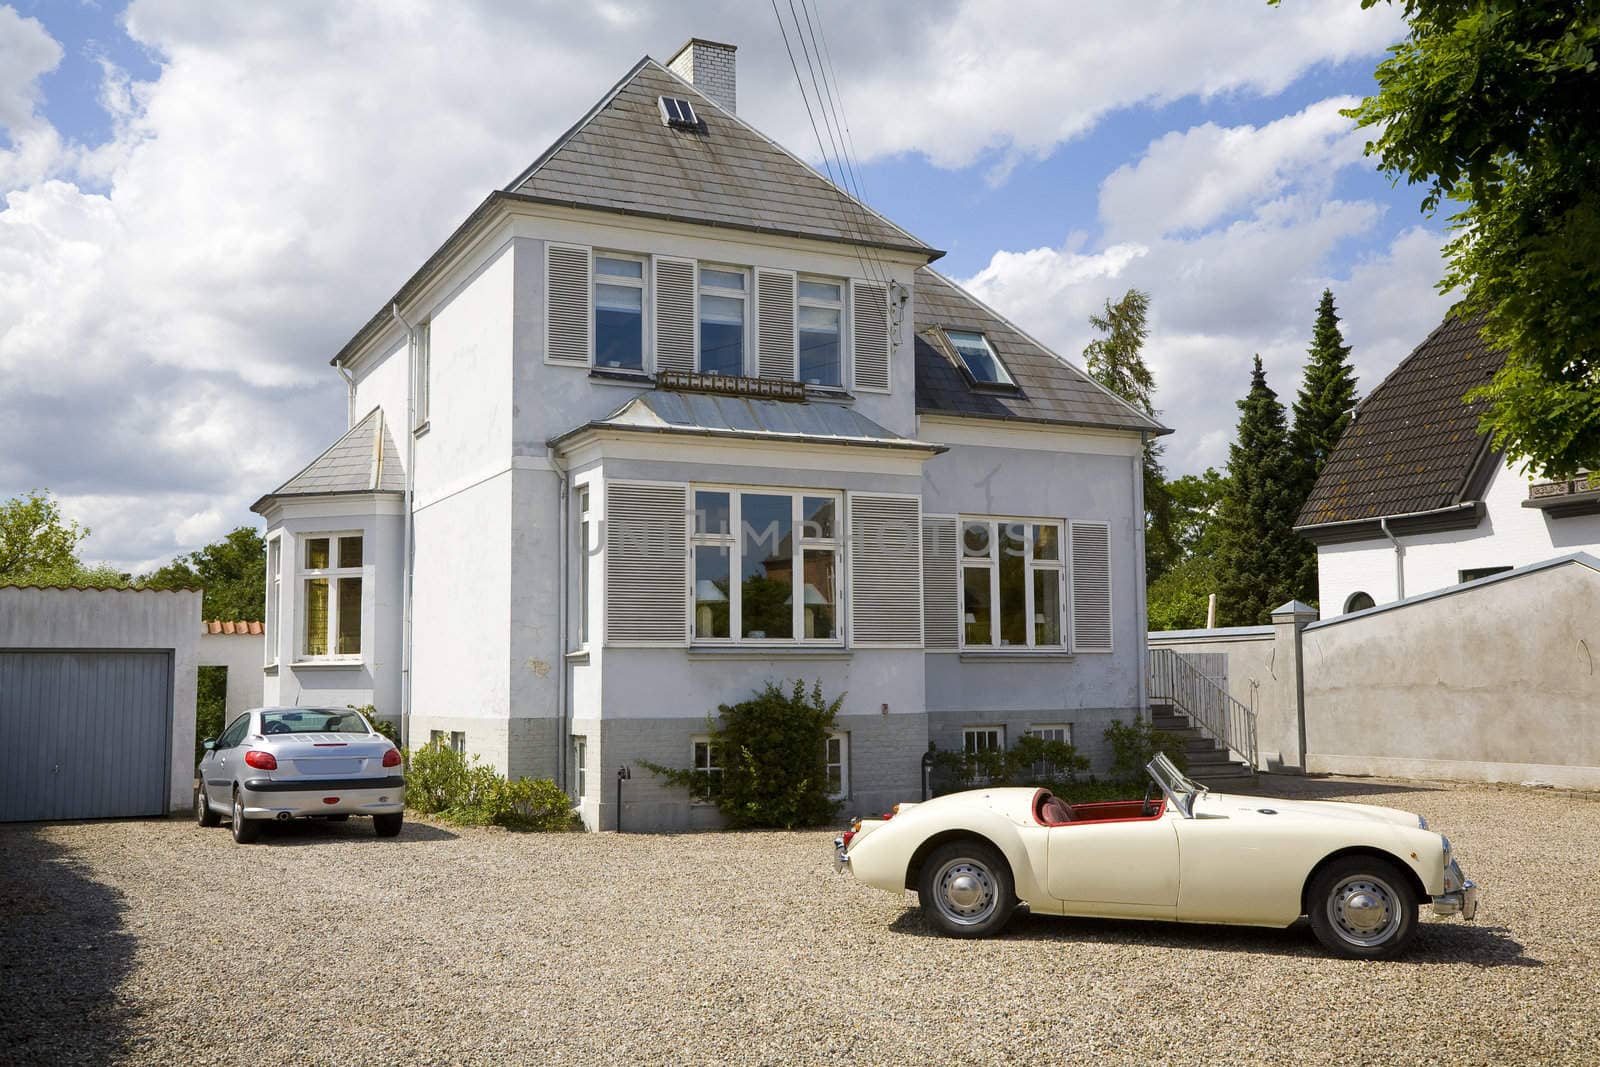 Old Danish villa with two cars in the driveway.